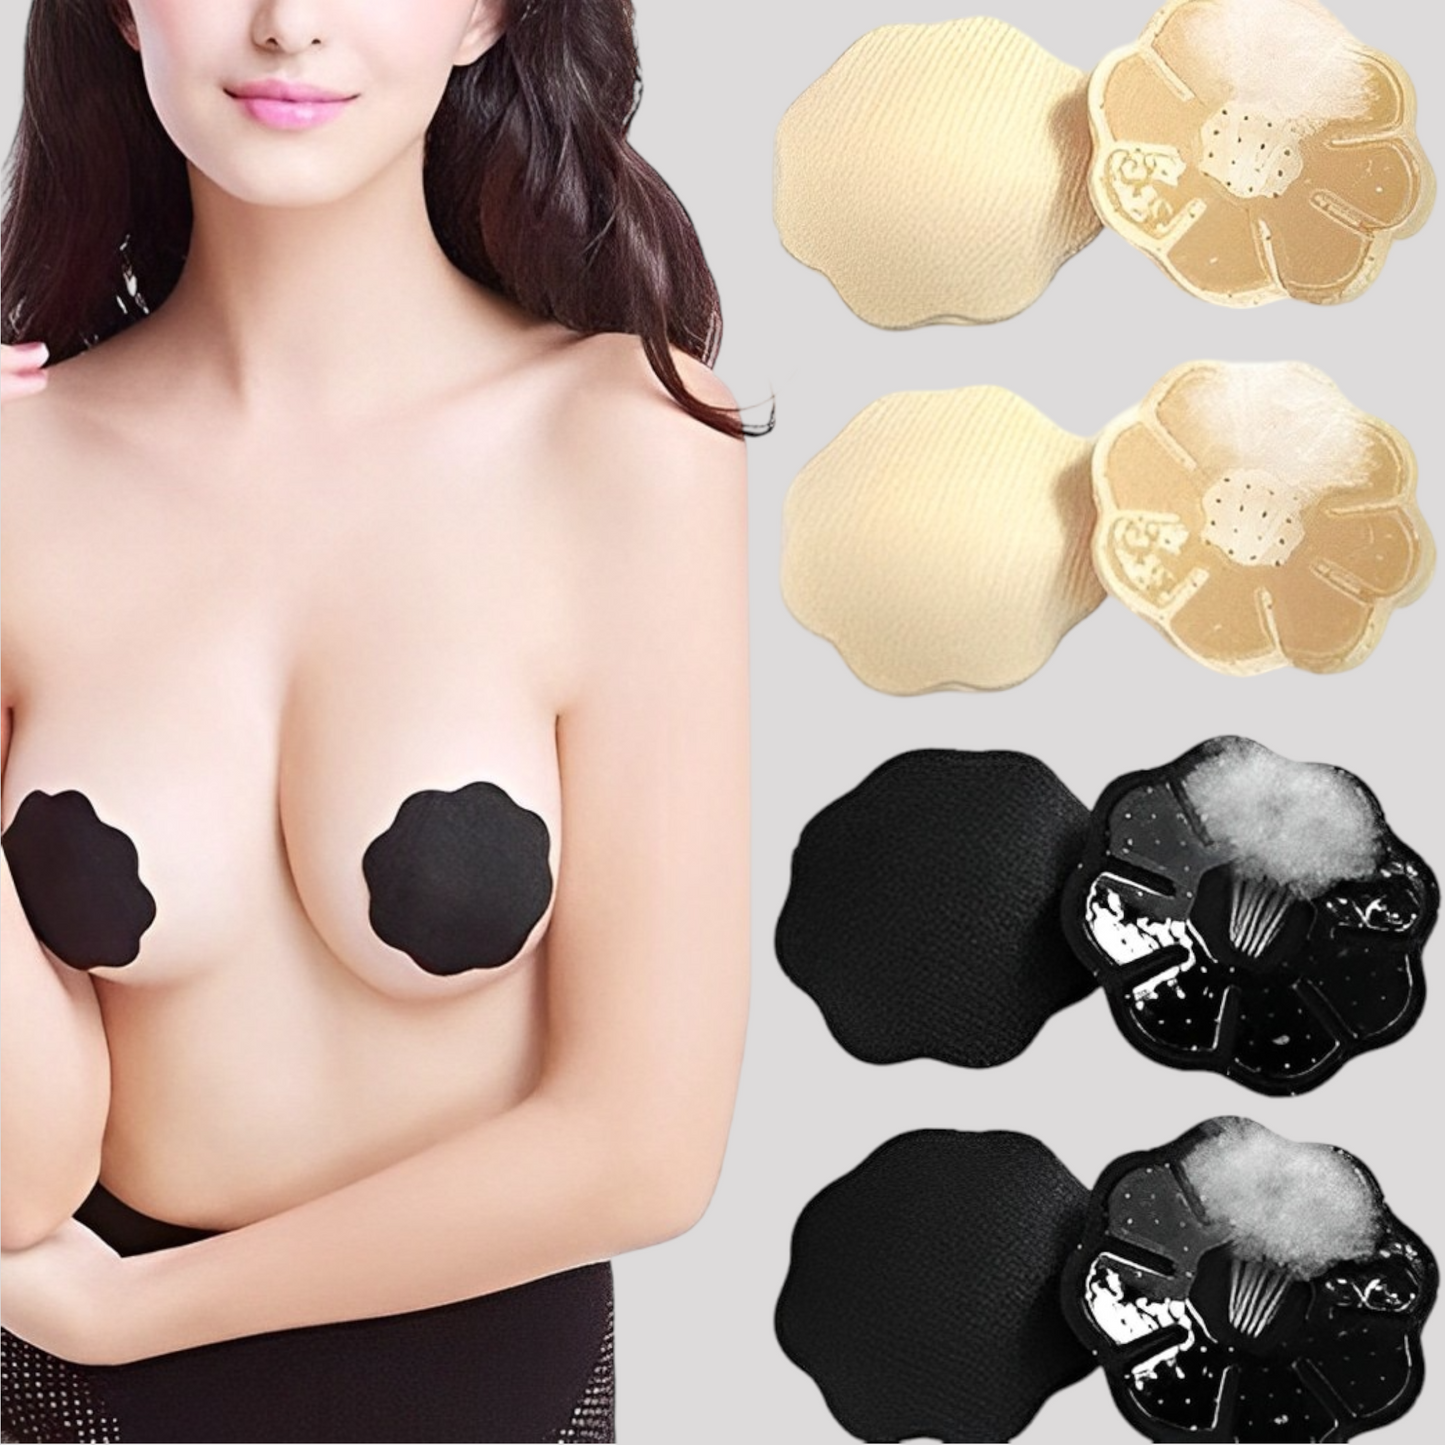 Reusable Self-Adhesive Nipple Cover - Fabric Covered